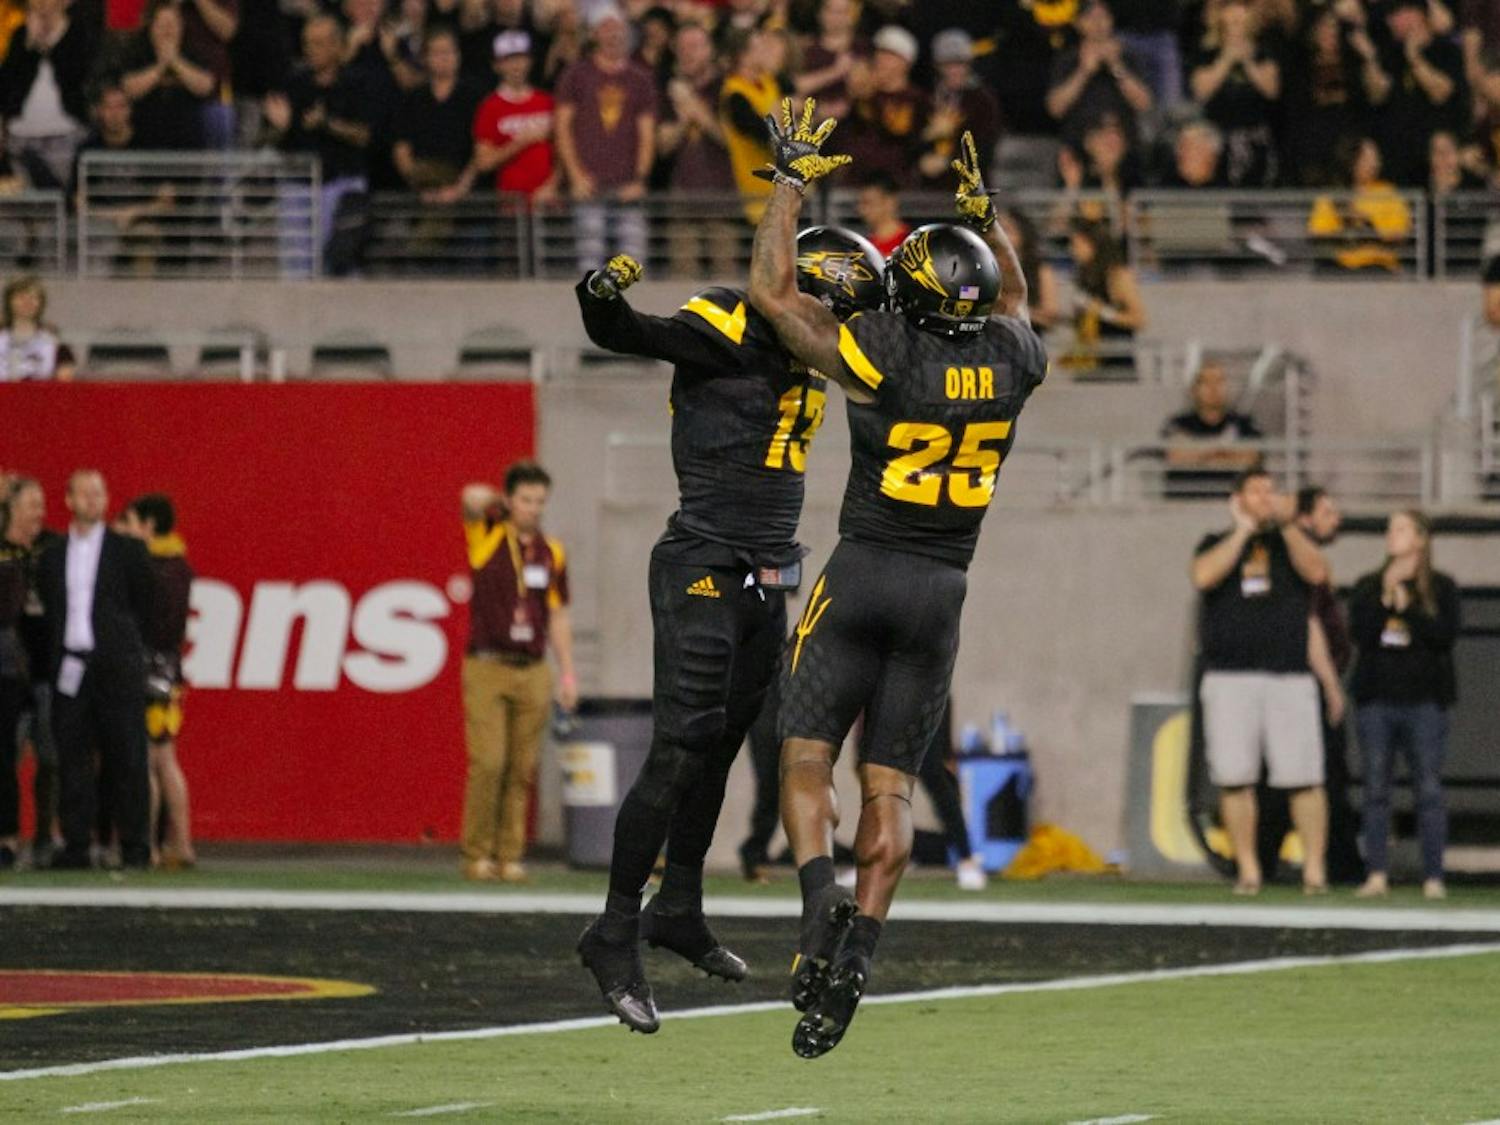 Armand Perry (13) and Kareem Orr (25) celebrate after a Sun Devil touchdown during a football game against Utah in Sun Devil Stadium in Tempe, Arizona, on Thursday, Nov. 10, 2016.